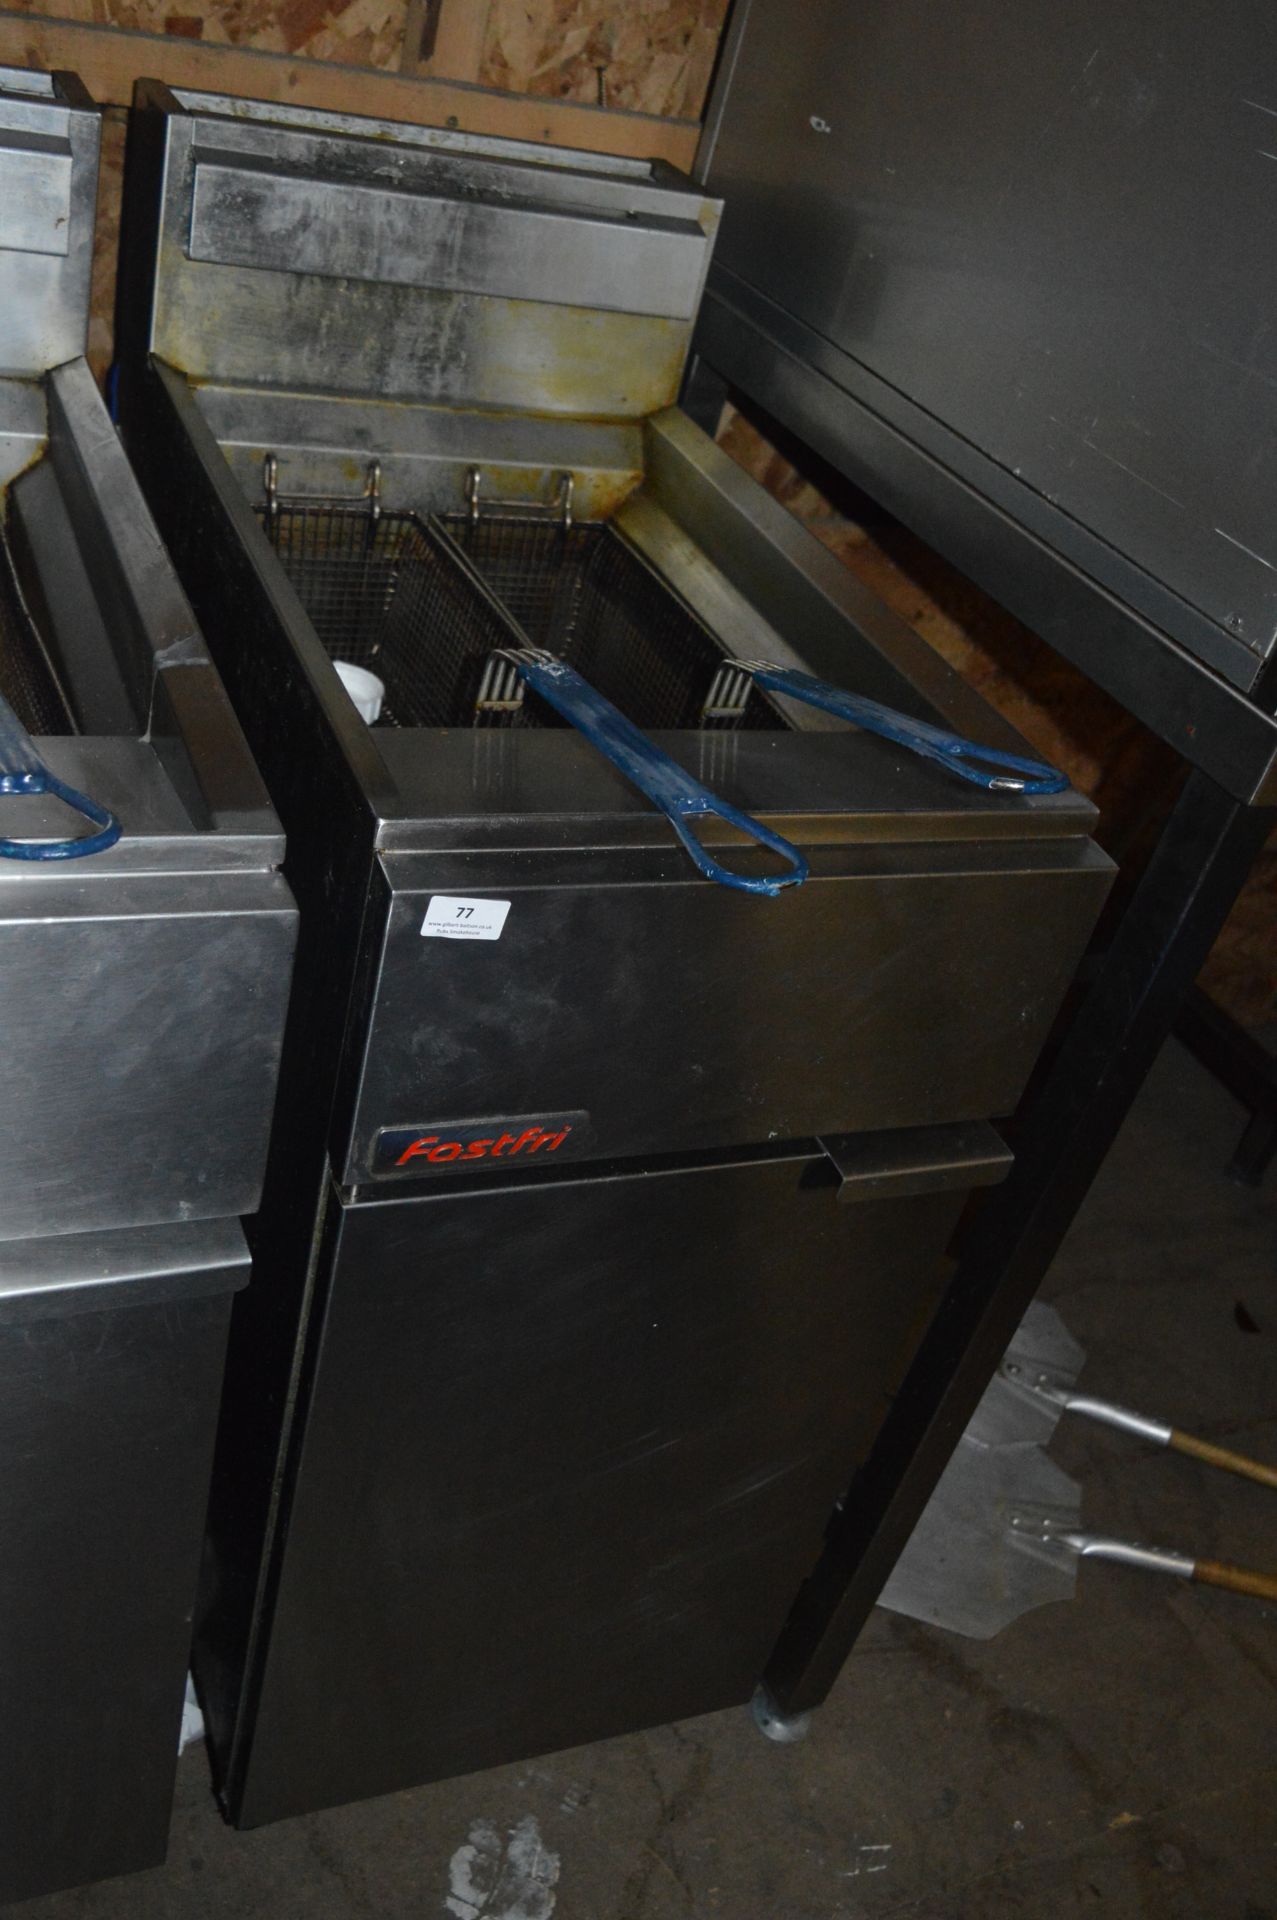 *Fastfri Two Basket Single Compartment Gas Fryer